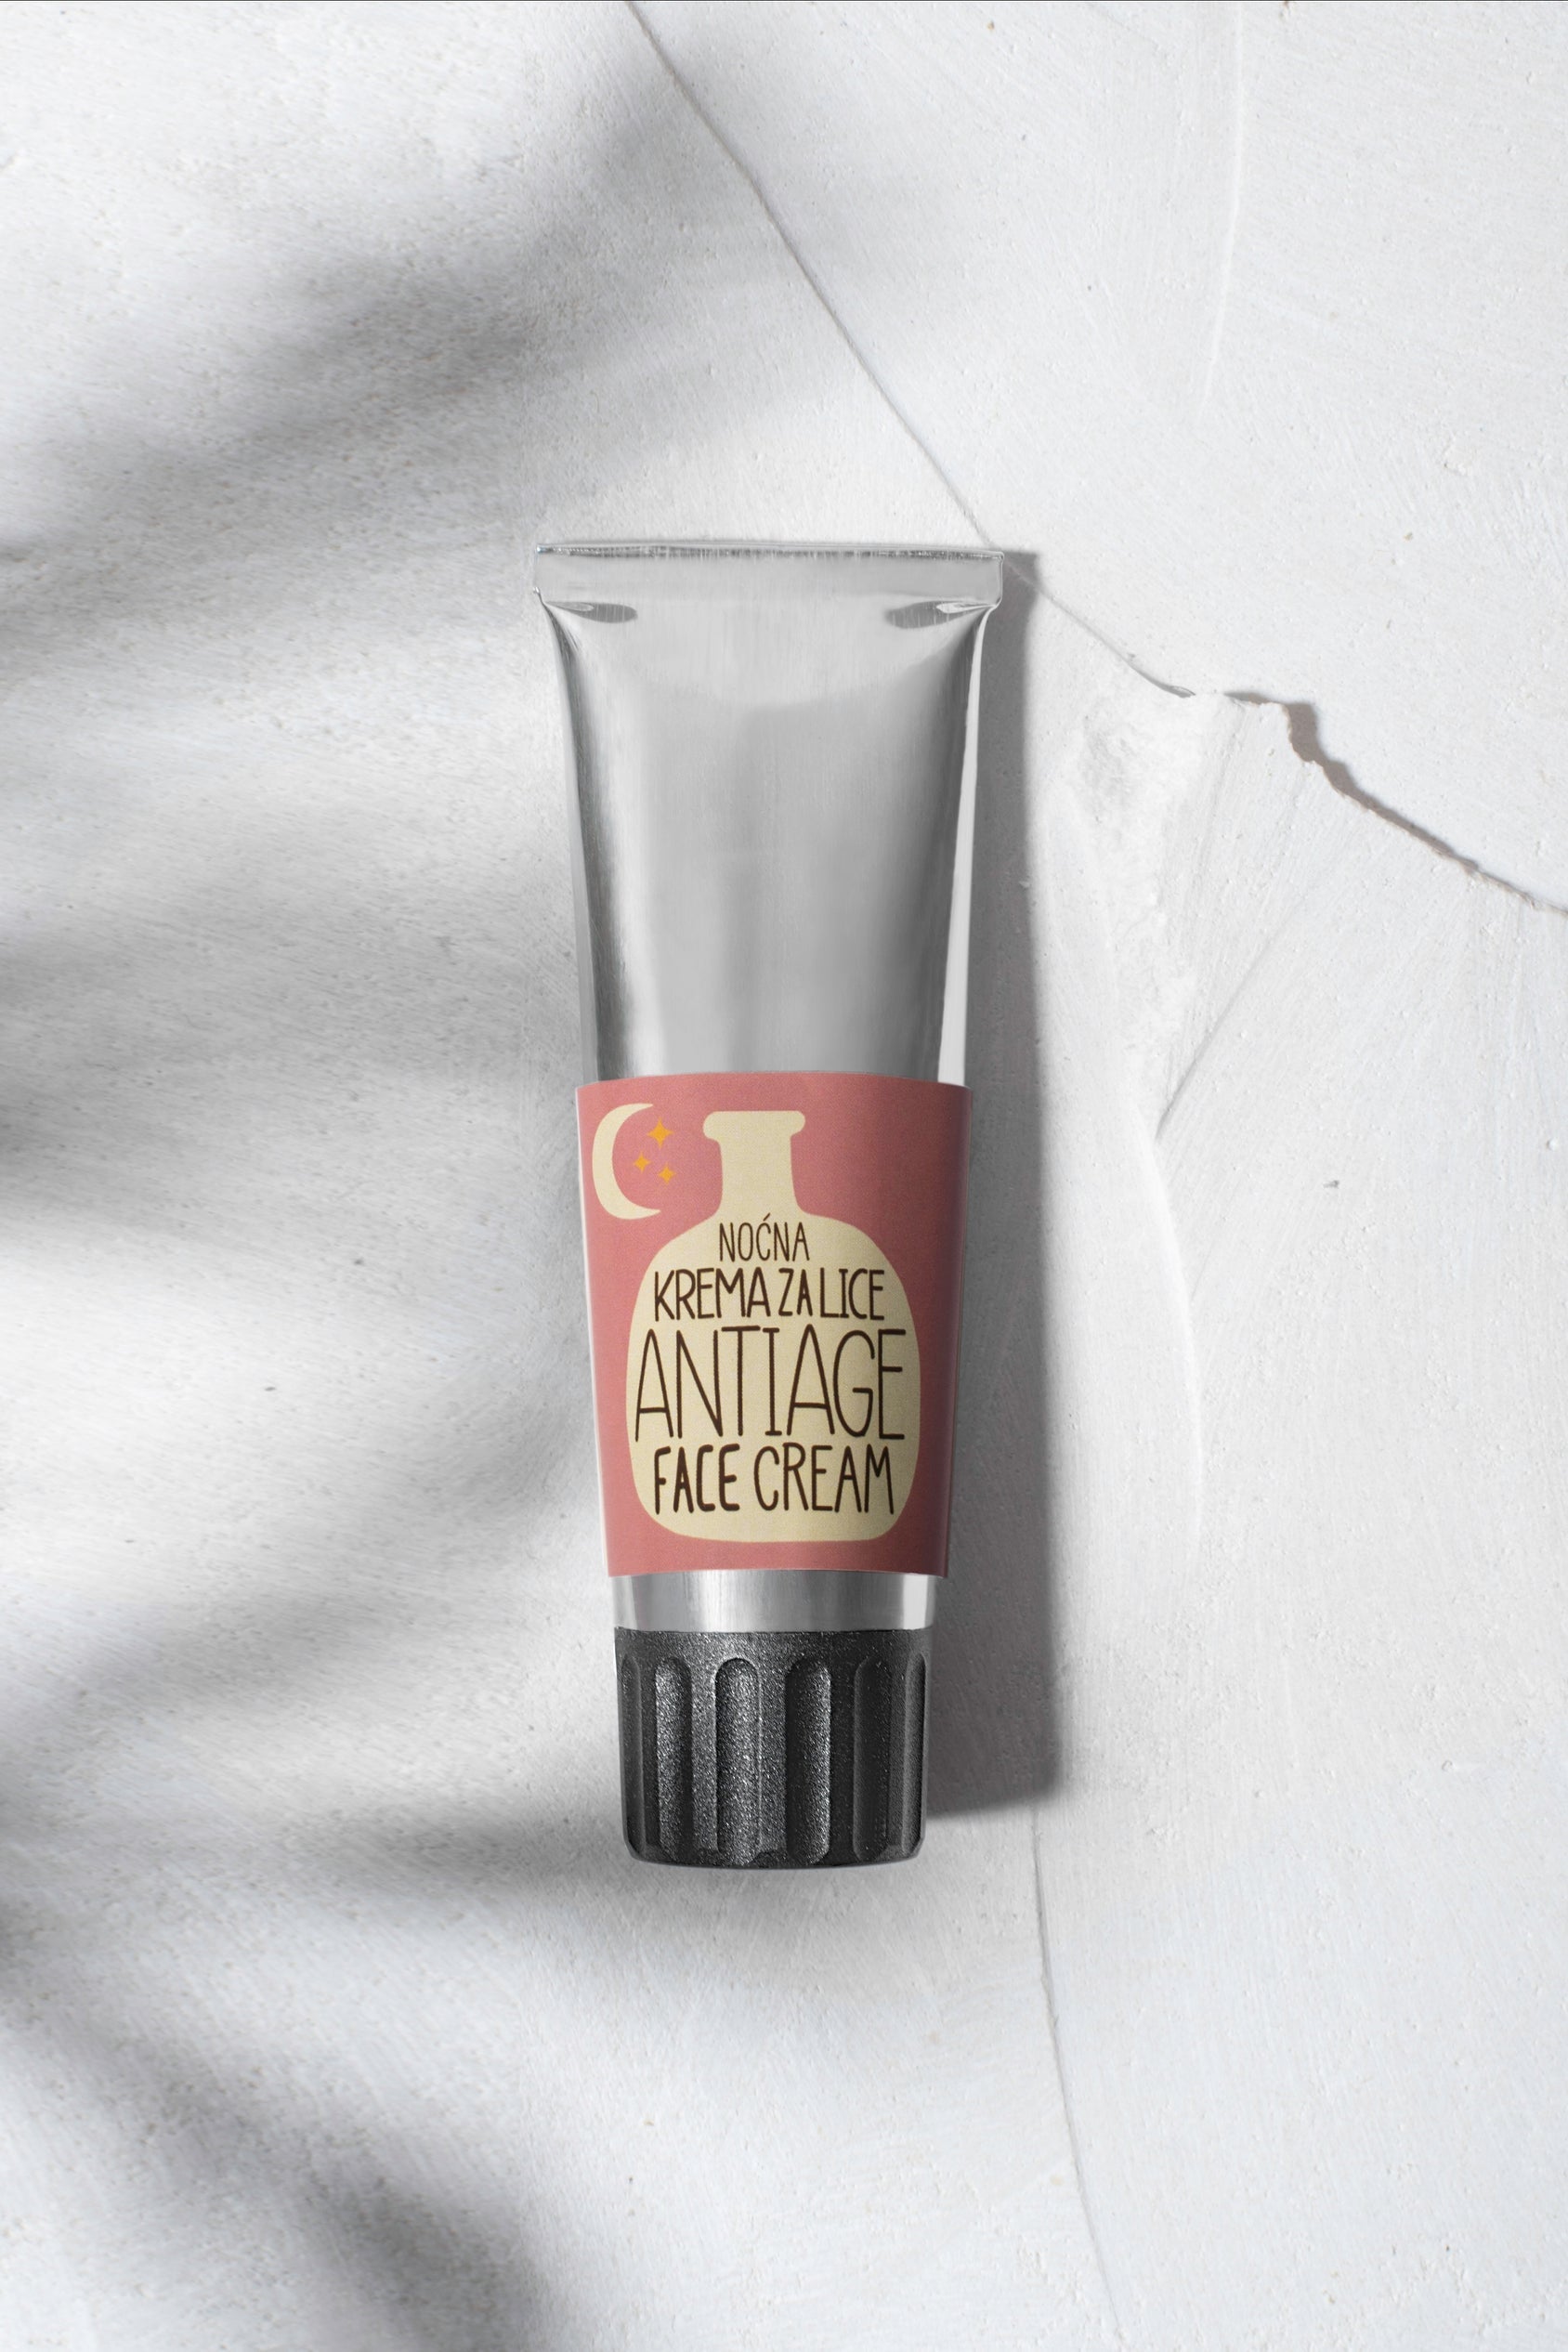 Anti Age Night Cream [sea buckthorn pulp and chia seed extracts]